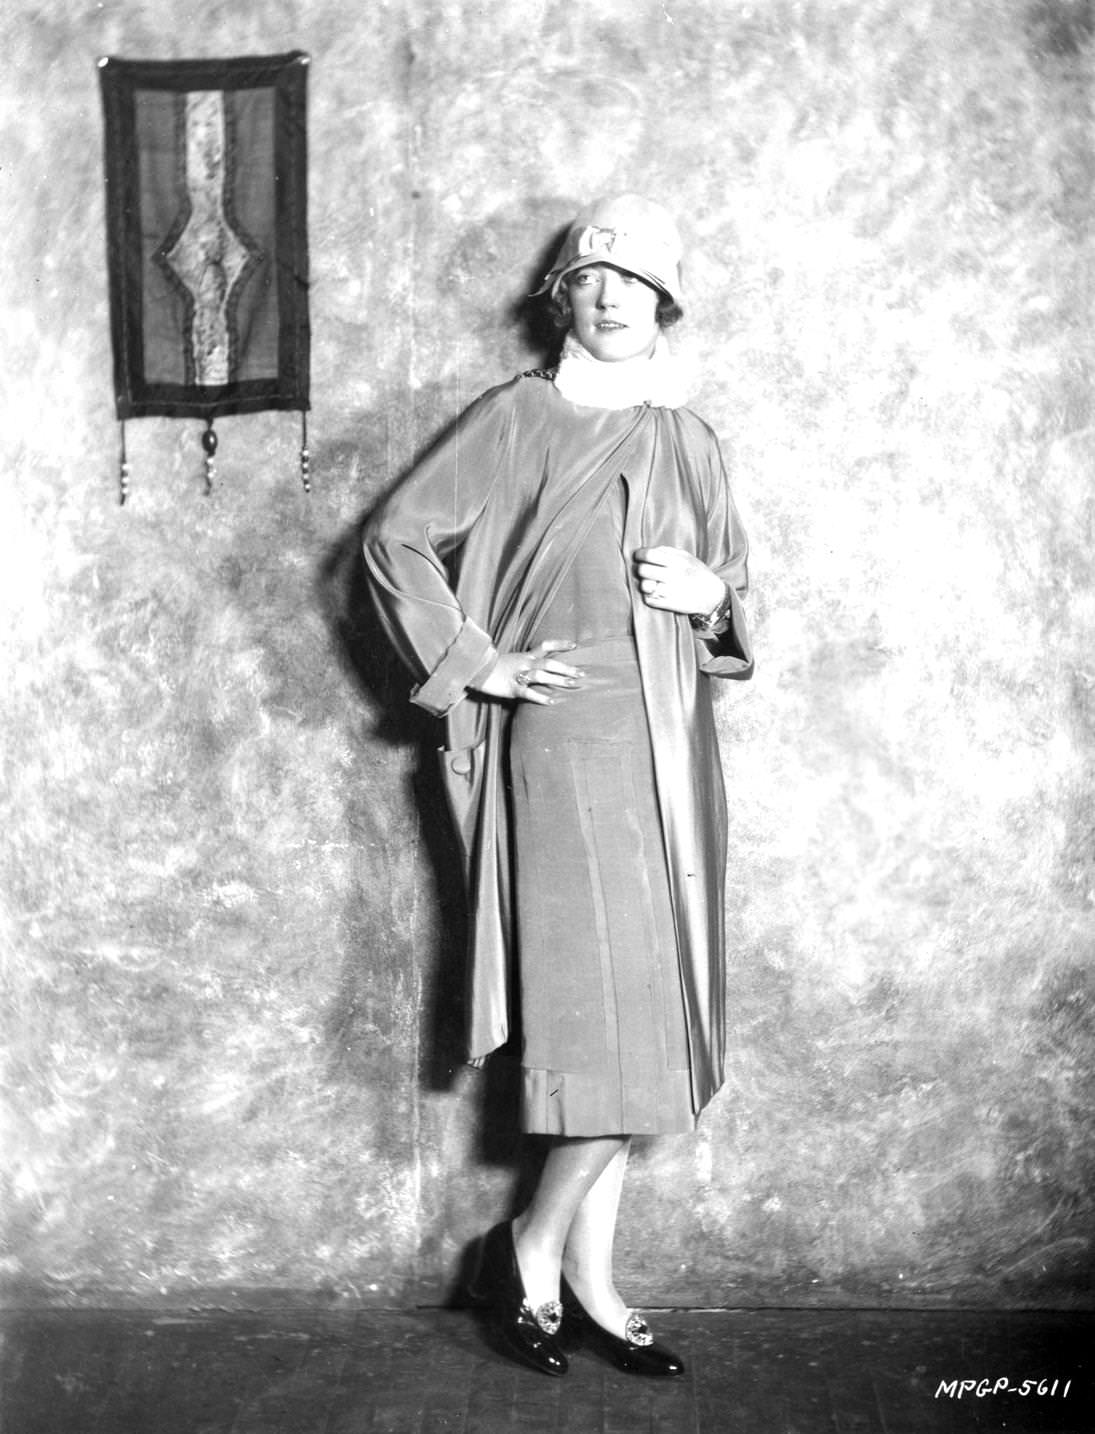 American film star Marion Davies modelling a cloche hat and a long jacket, 1920